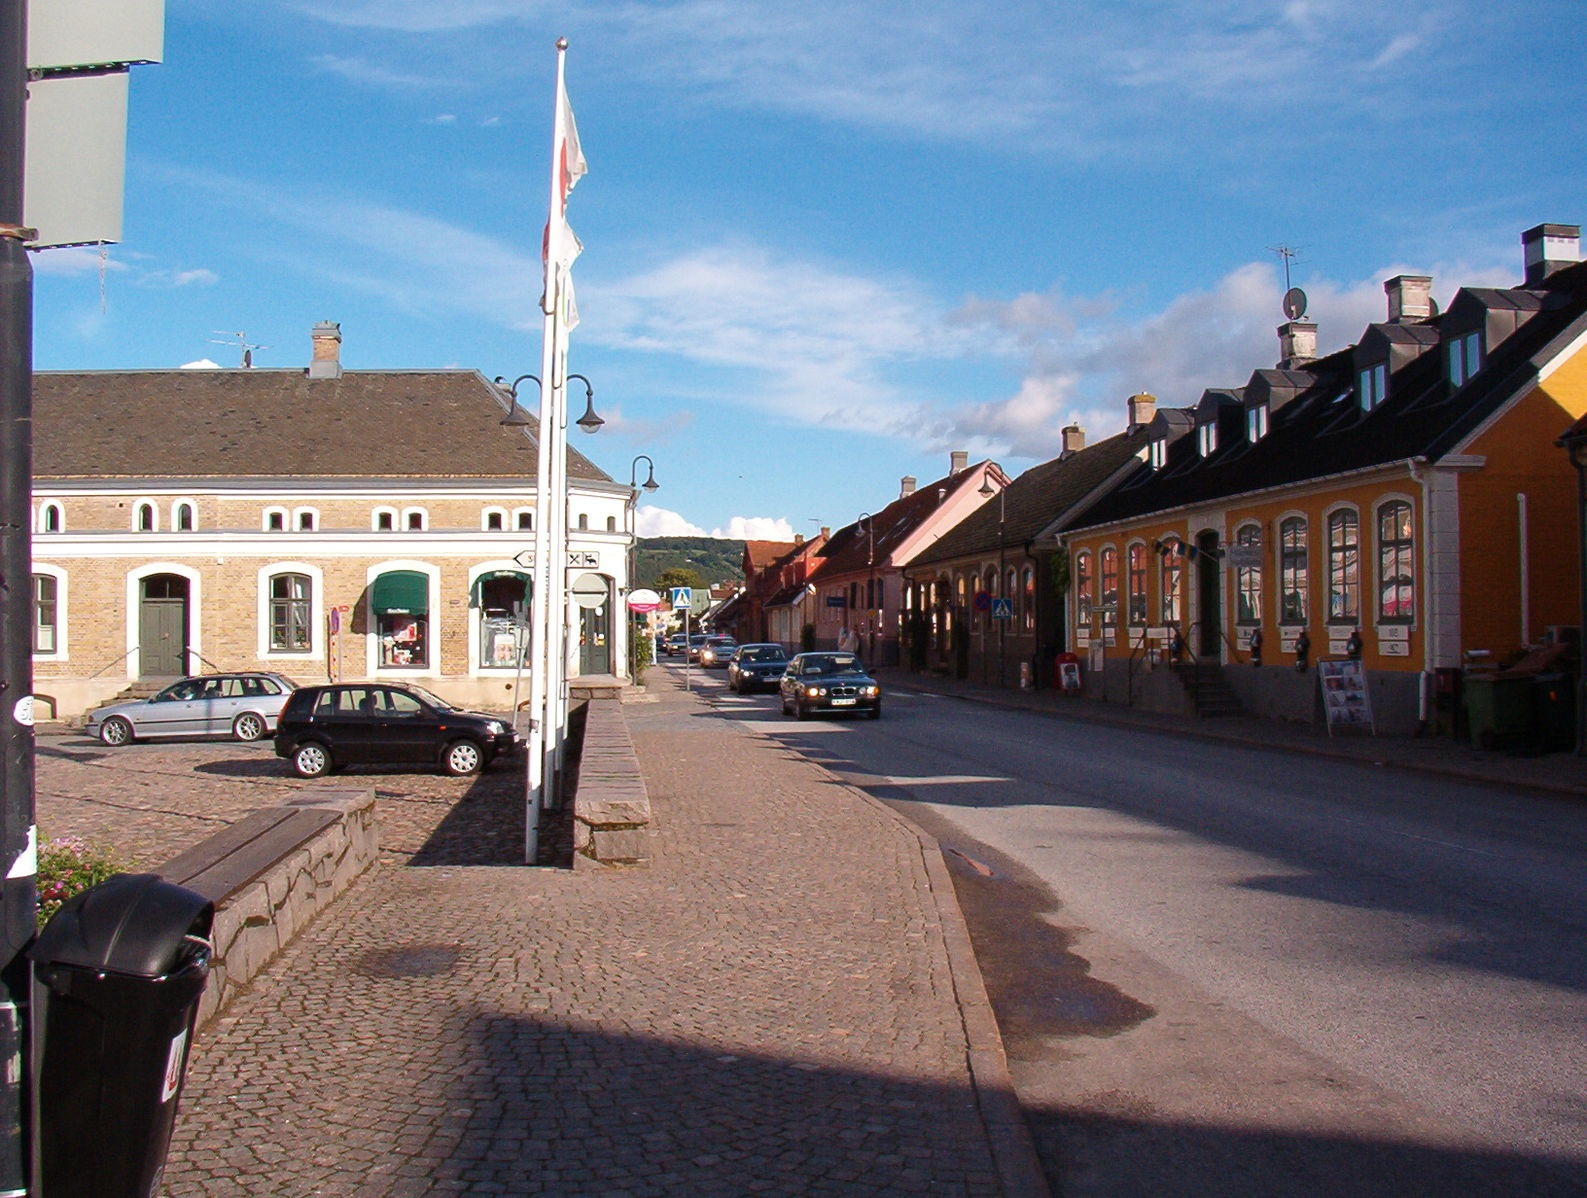 Fred J. https://commons.wikimedia.org/wiki/File:B%C3%A5stad,_Sweden,_a_street_adjacent_to_market_square.jpg